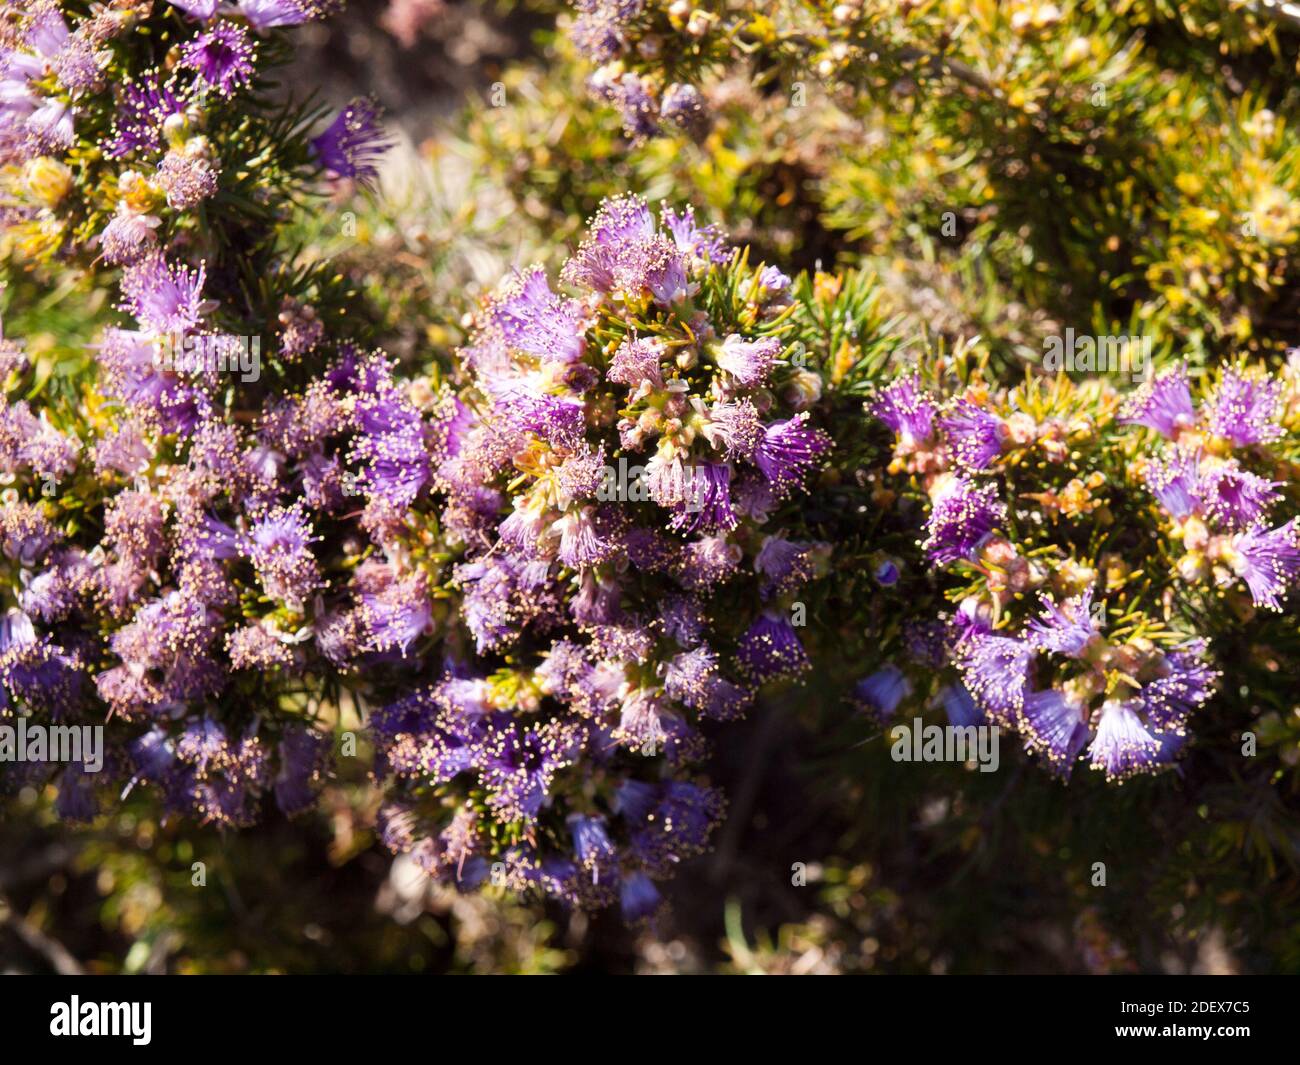 purple, gold-tipped flowers and spiky leaves of this Western Australian melaleuca endemic to Lesueur Naional Park. Stock Photo